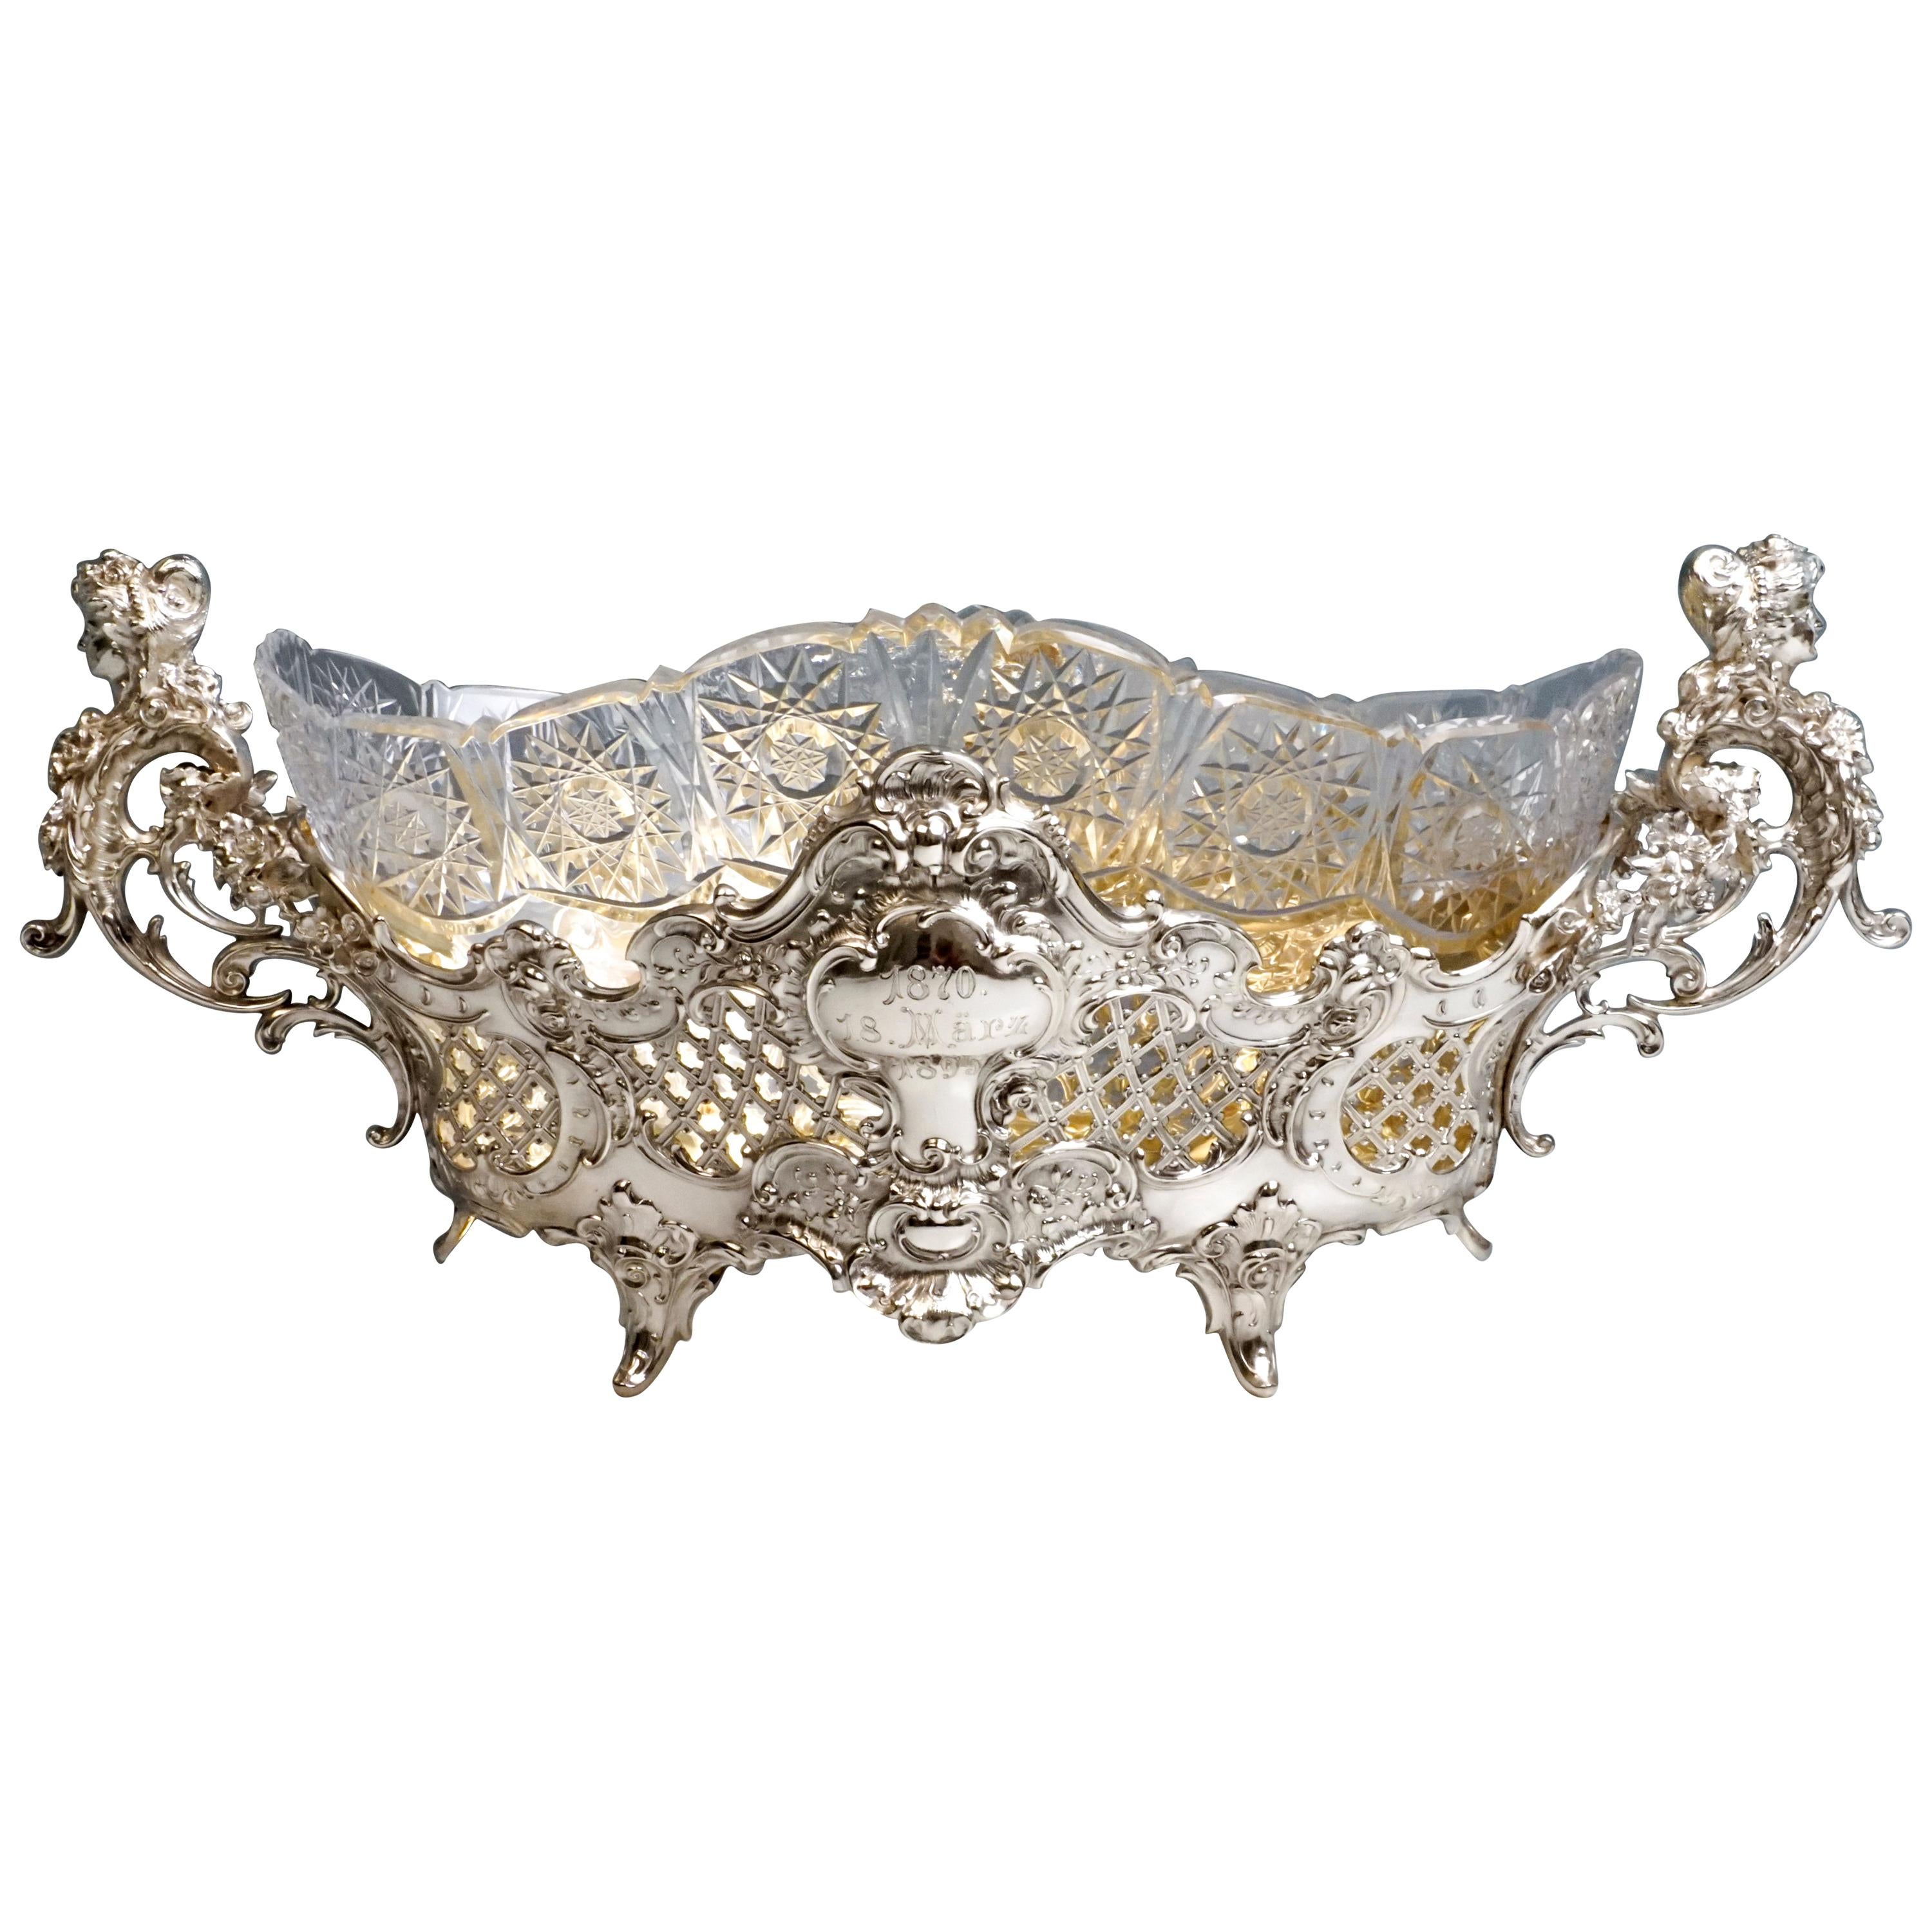 Large Silver Centerpiece Historicism Flower Bowl With Glass Liner, Germany, 1895